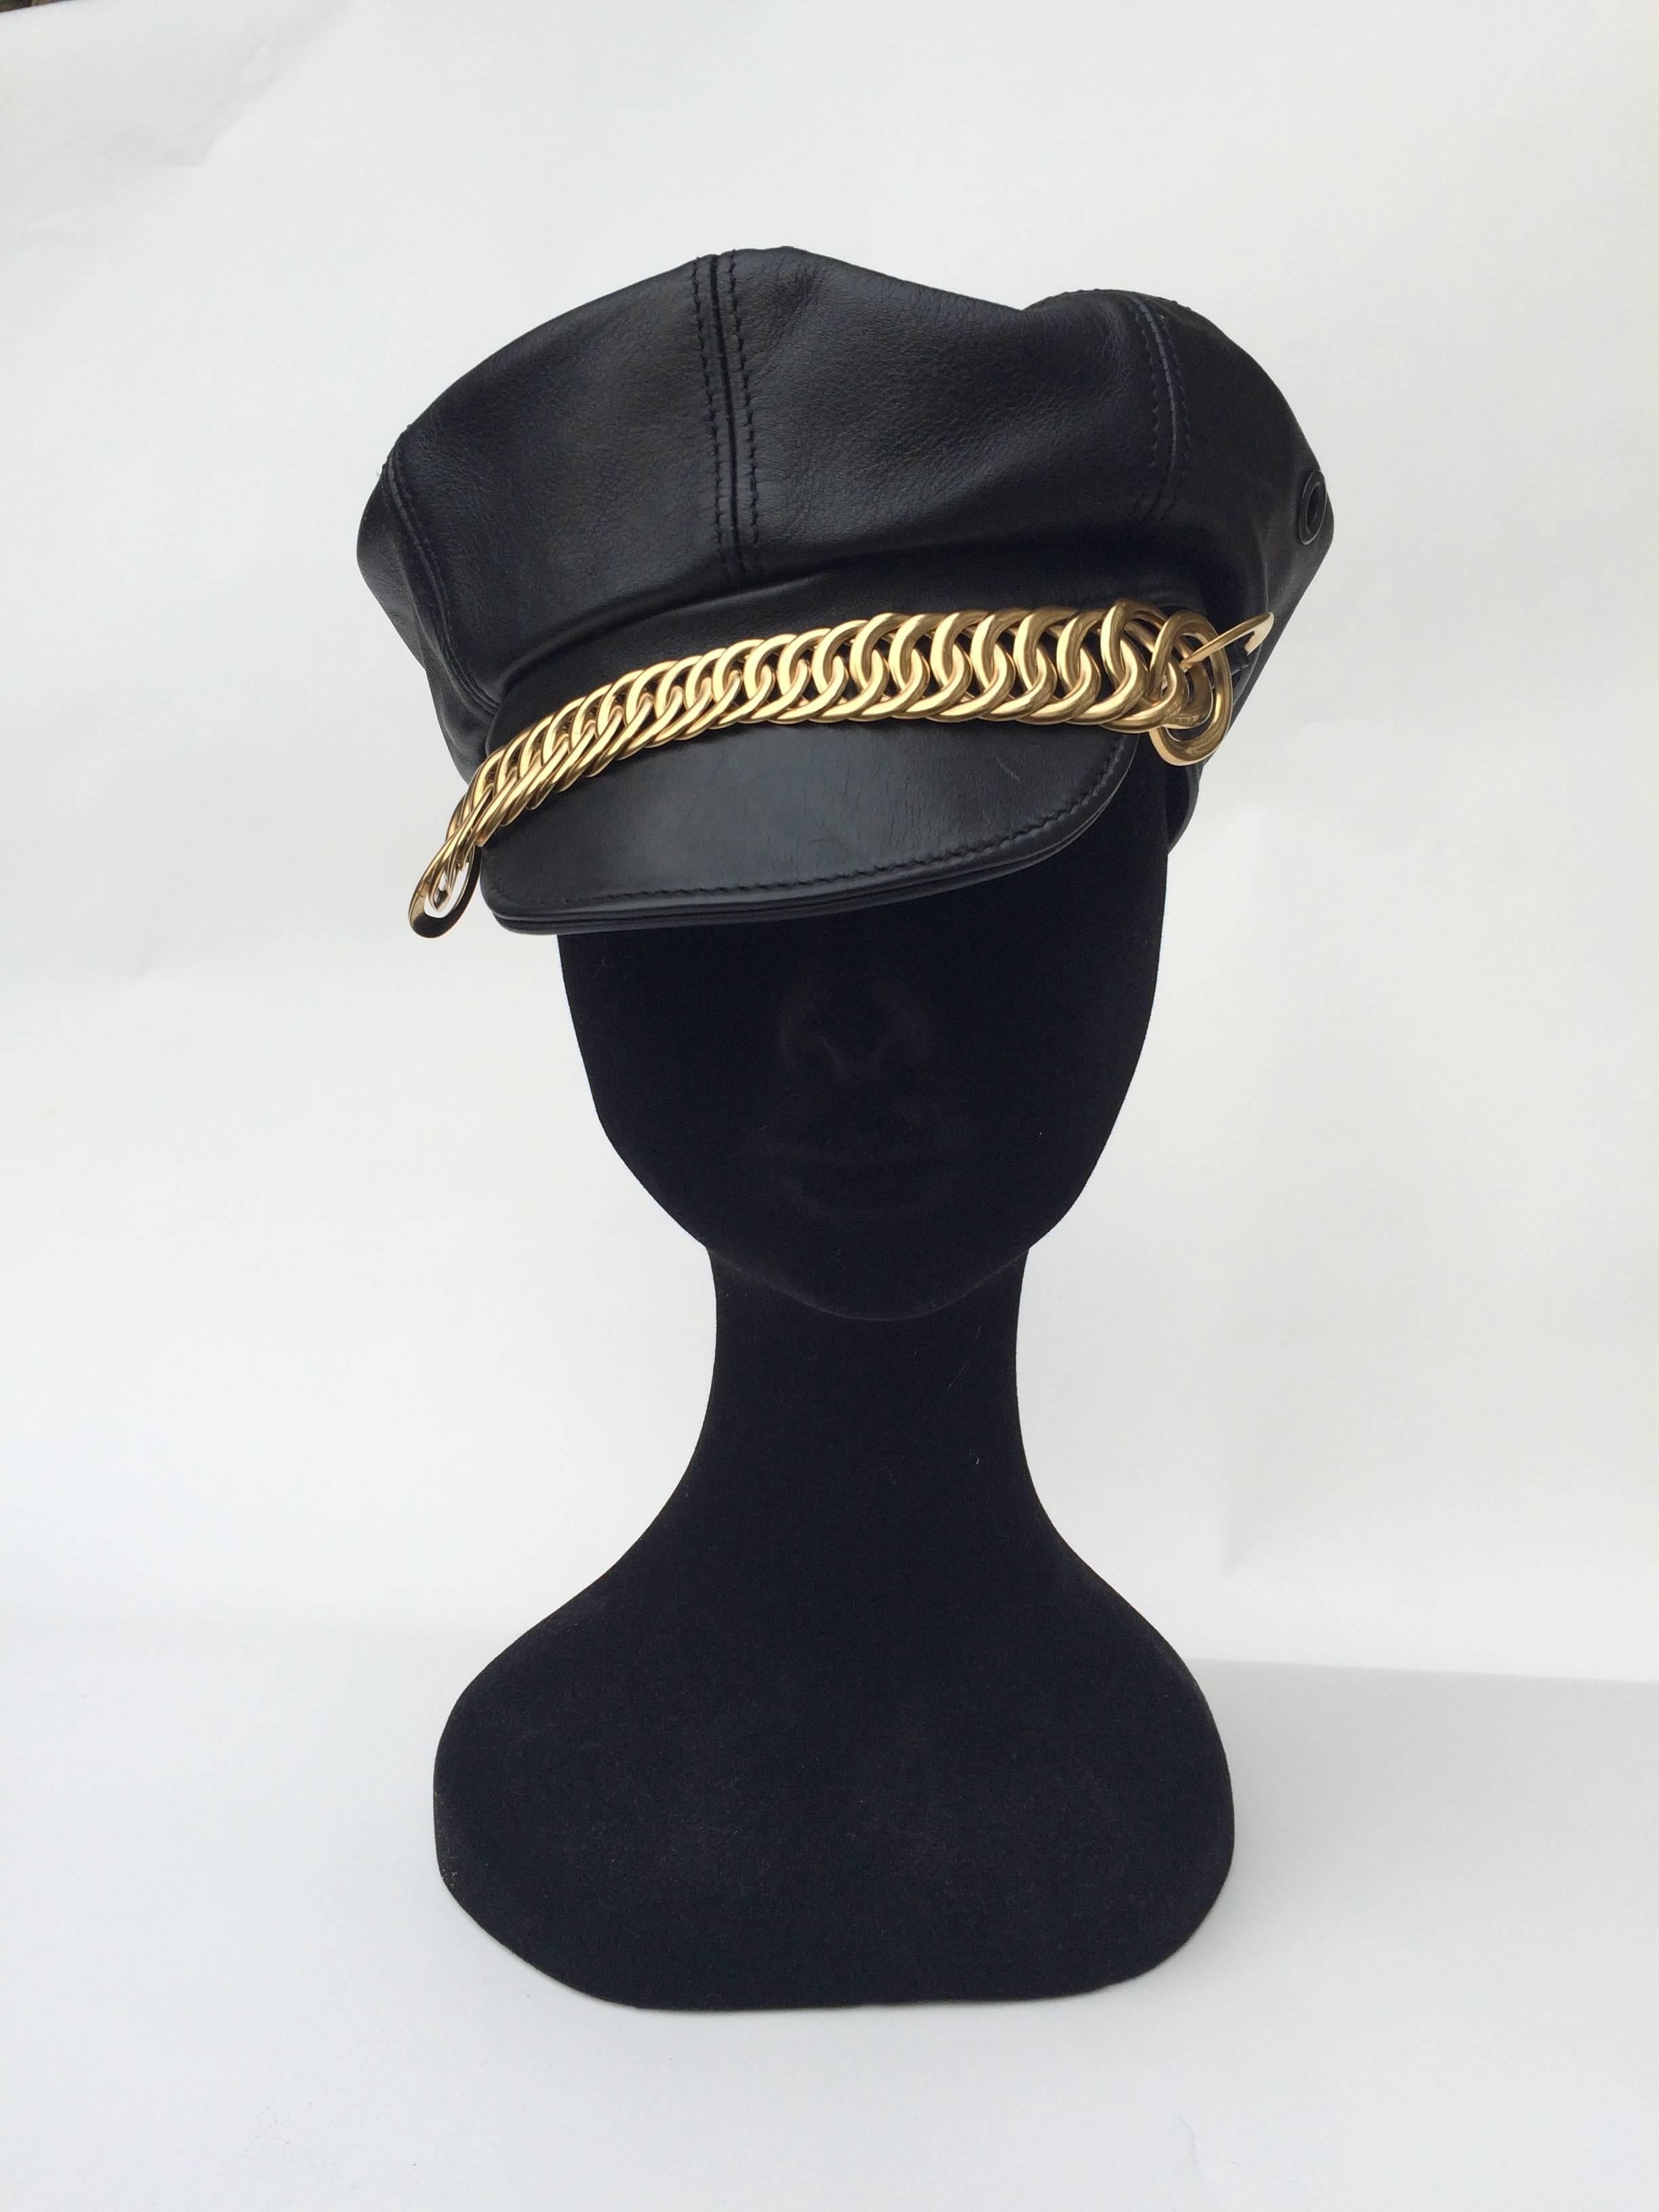 Raunchy leather cap designed by the wonderful Nicholas Ghesquiere of Balenciaga. This has a fantastic shape think Marlon Brando "The Wild Ones"  - it has a really great mid century men's vibe but is actually designed for his women's